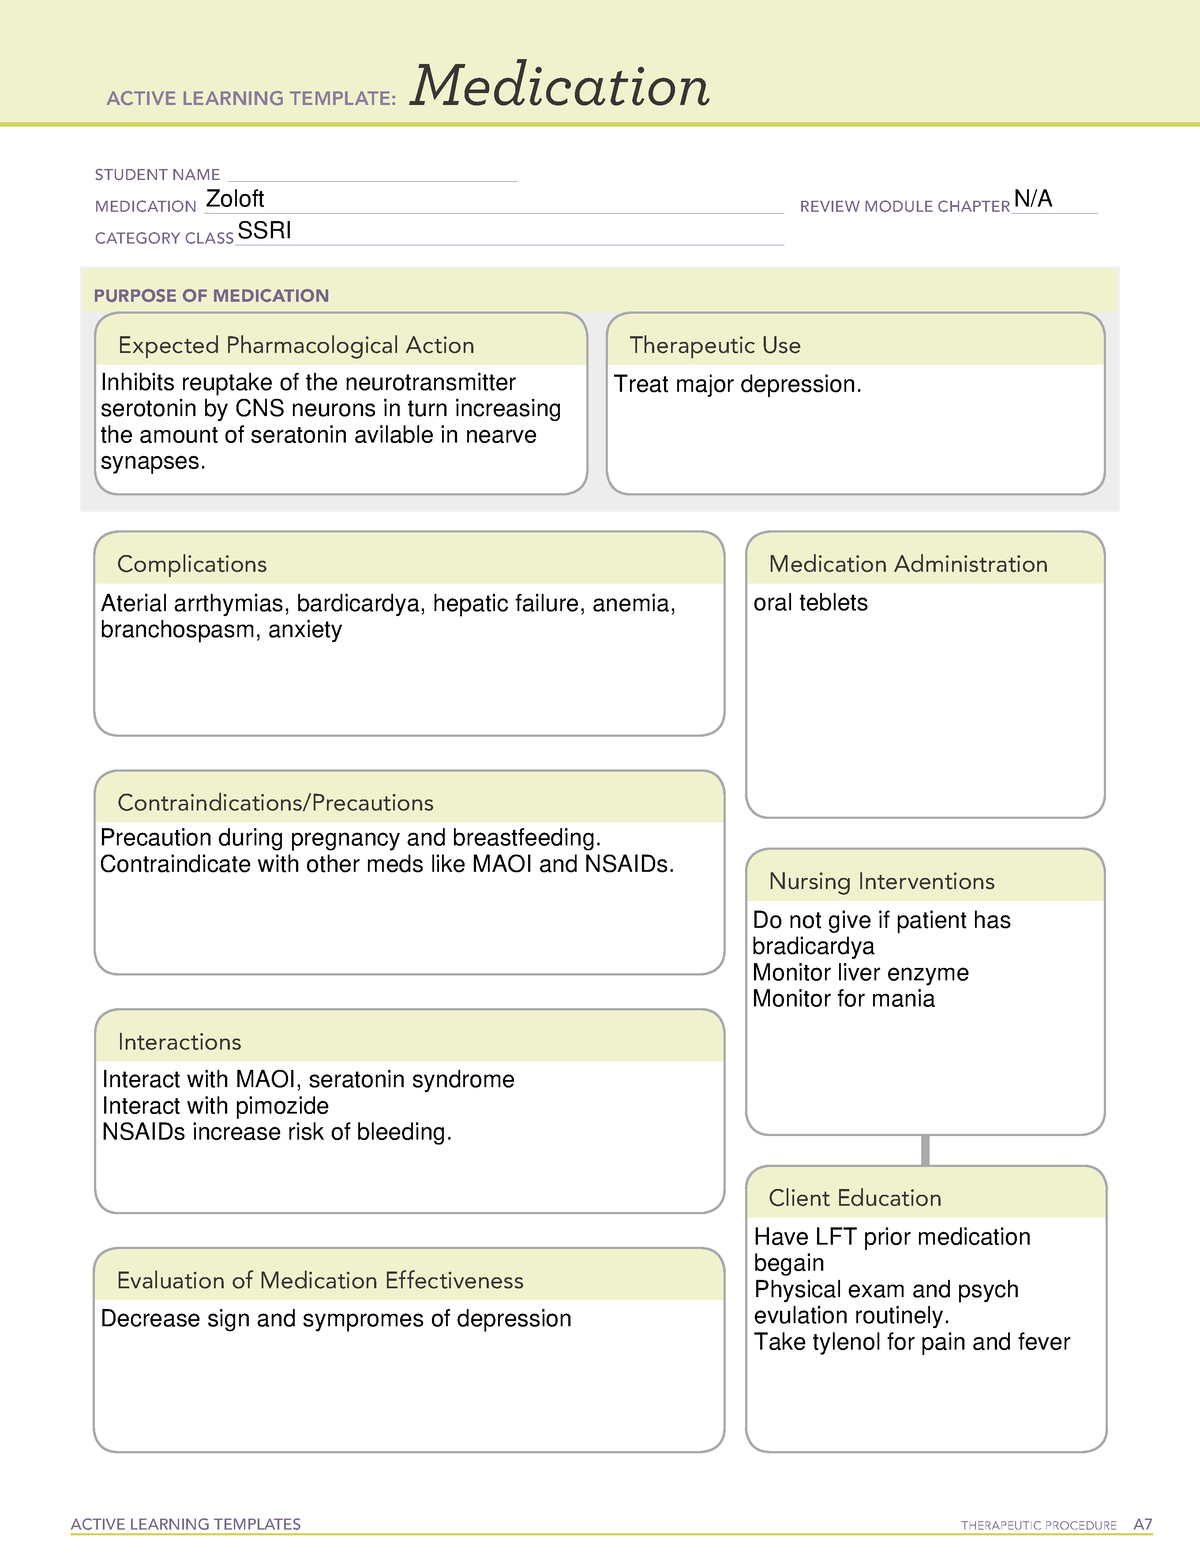 medtemp-sertraline-ati-medication-system-template-active-learning-templates-therapeutic